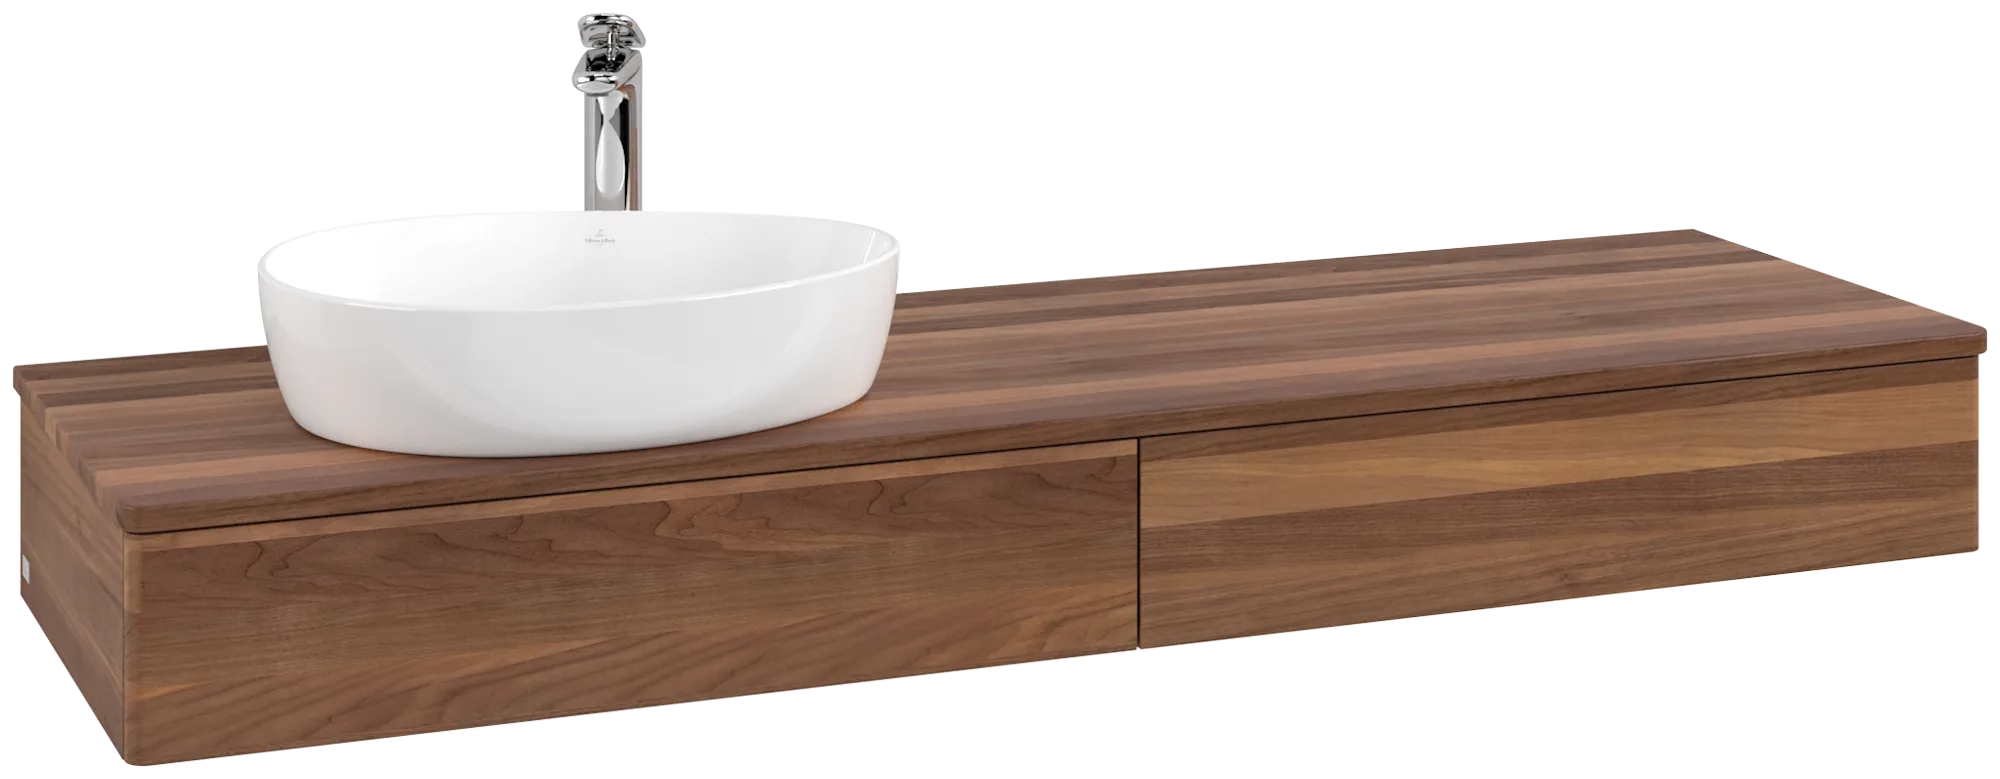 VILLEROY BOCH Antao Vanity unit, 2 pull-out compartments, 1600 x 190 x 500 mm, Front without structure, Warm Walnut / Warm Walnut #K15052HM resmi